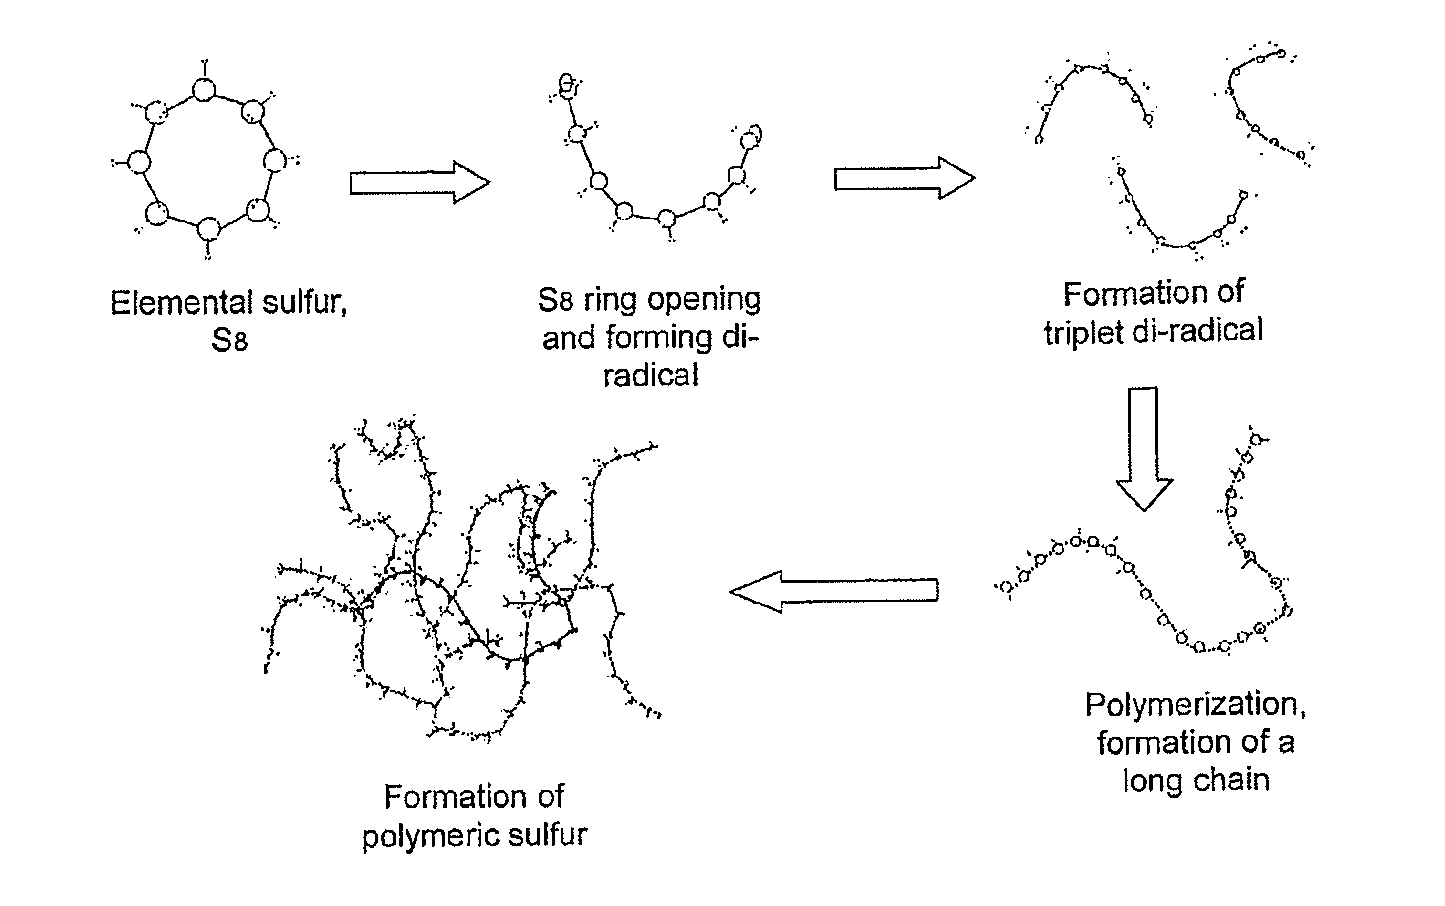 Use of surfactant in the preparation of modified sulfur and sulfur cement